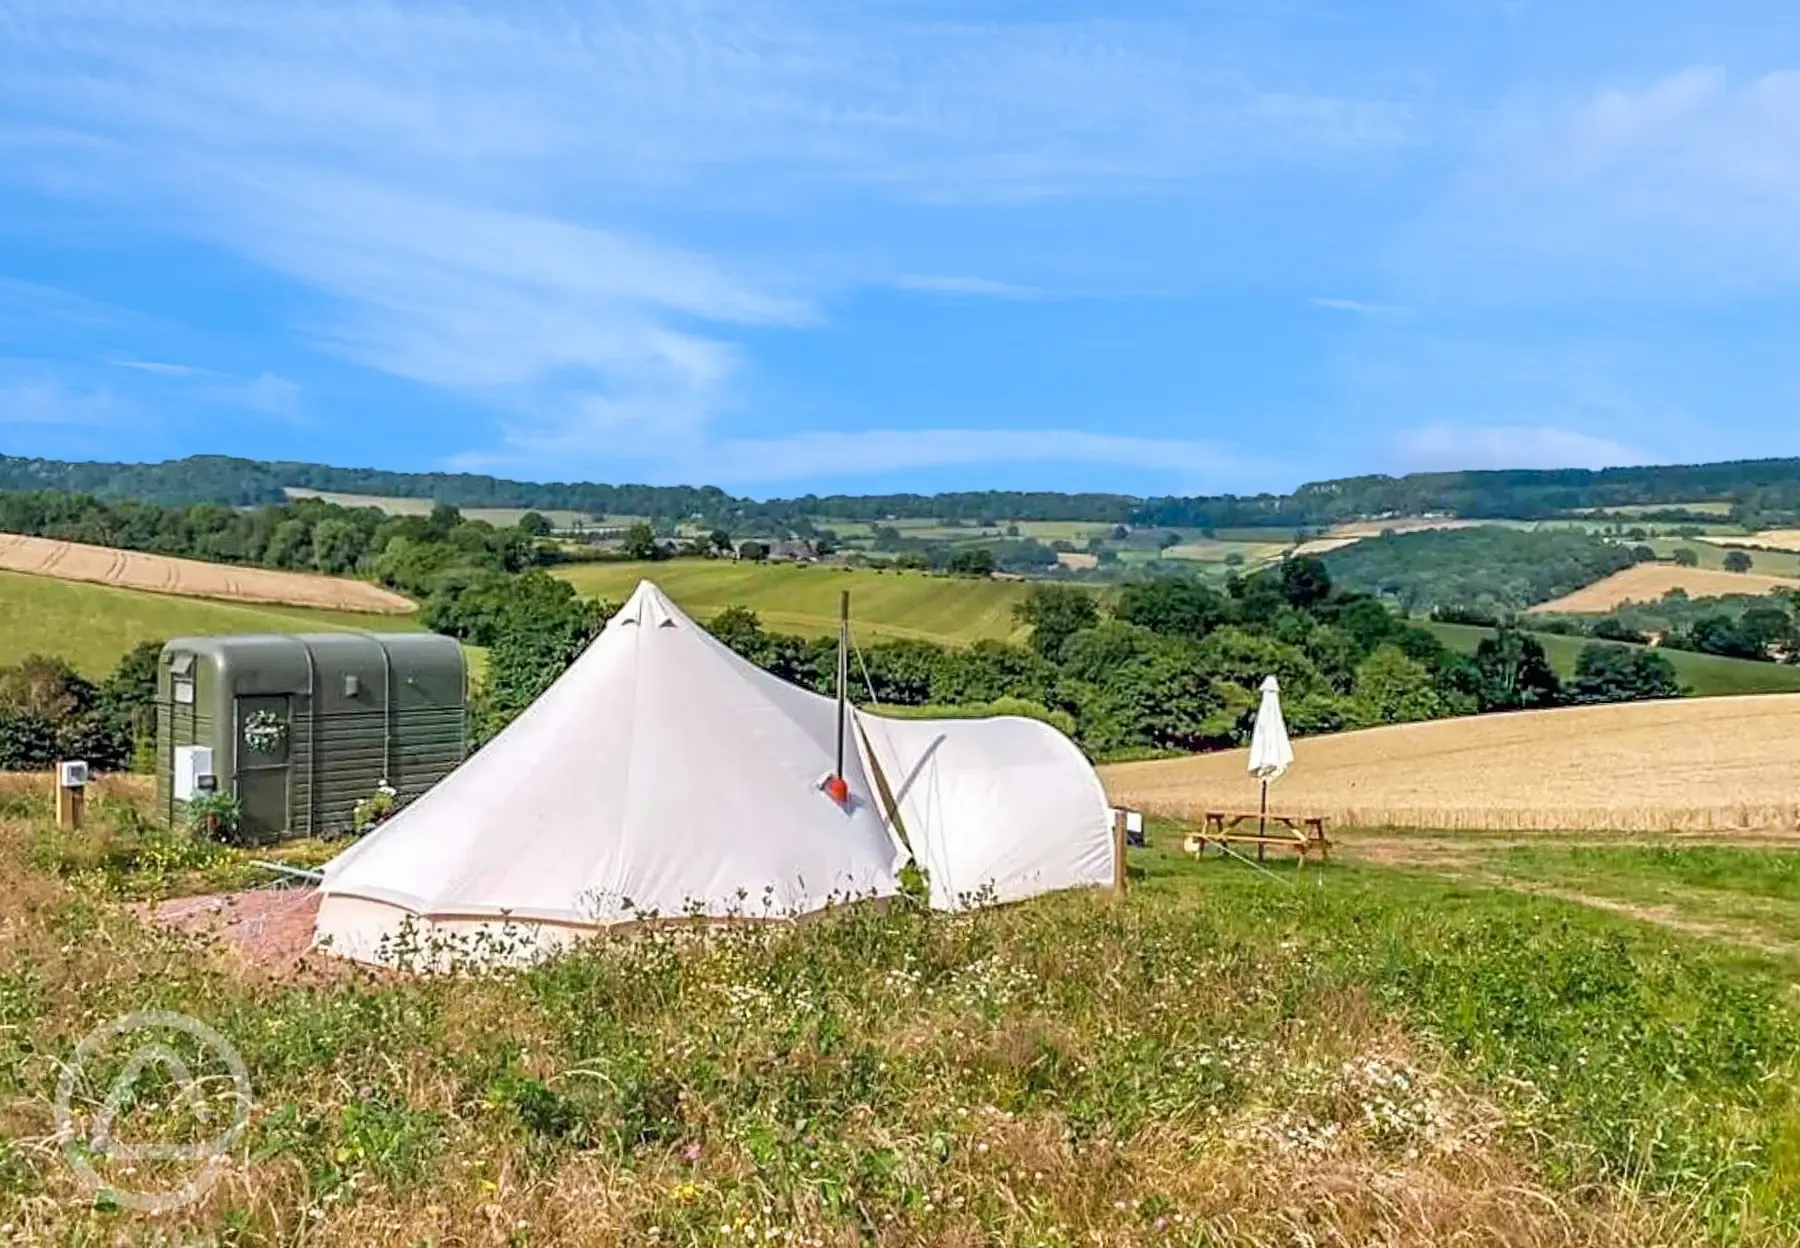 Overview of tent